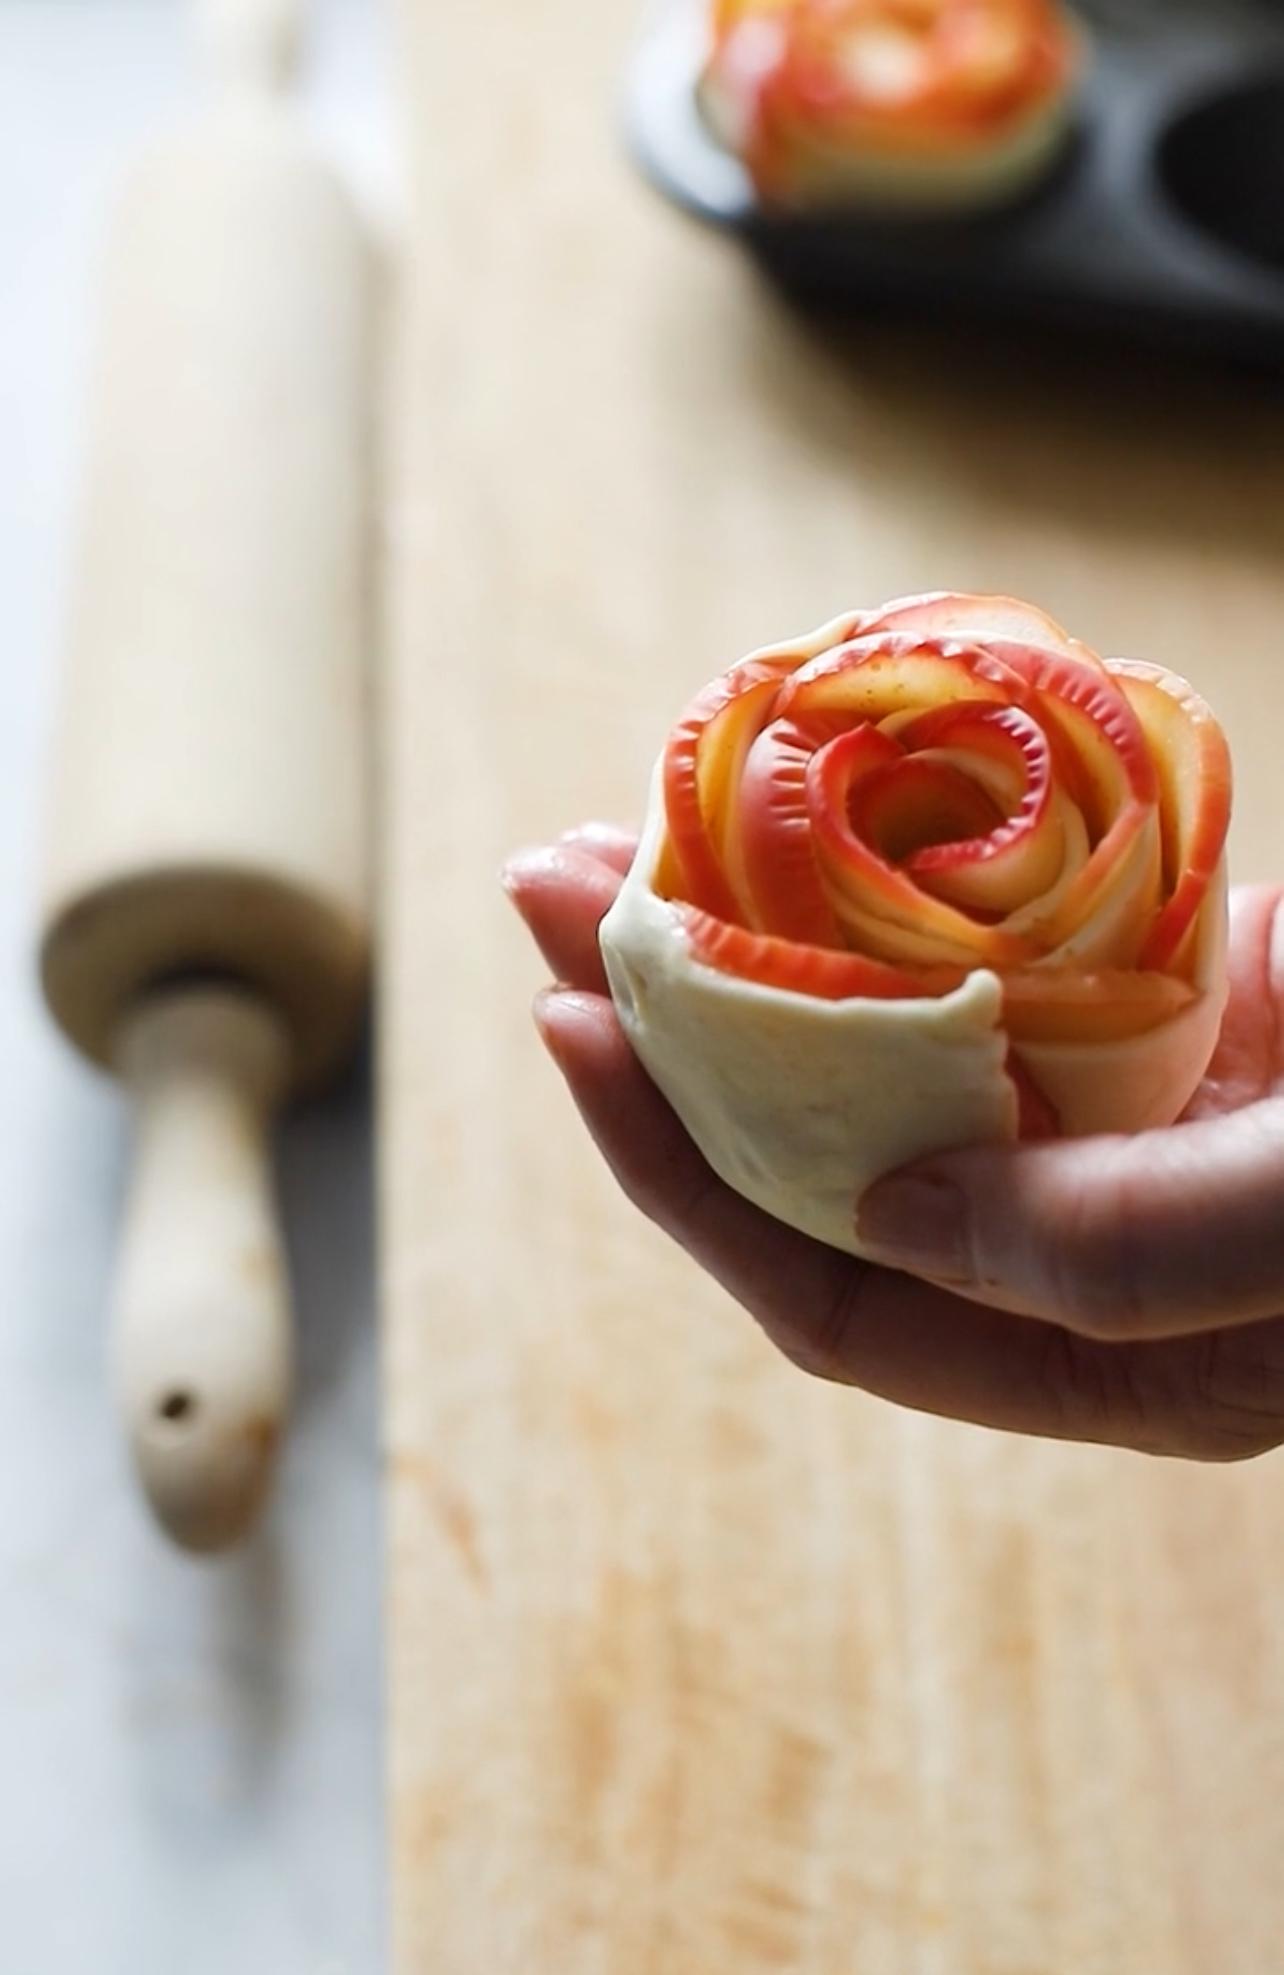 Apple Roses bring made with apple slices and pastry dough